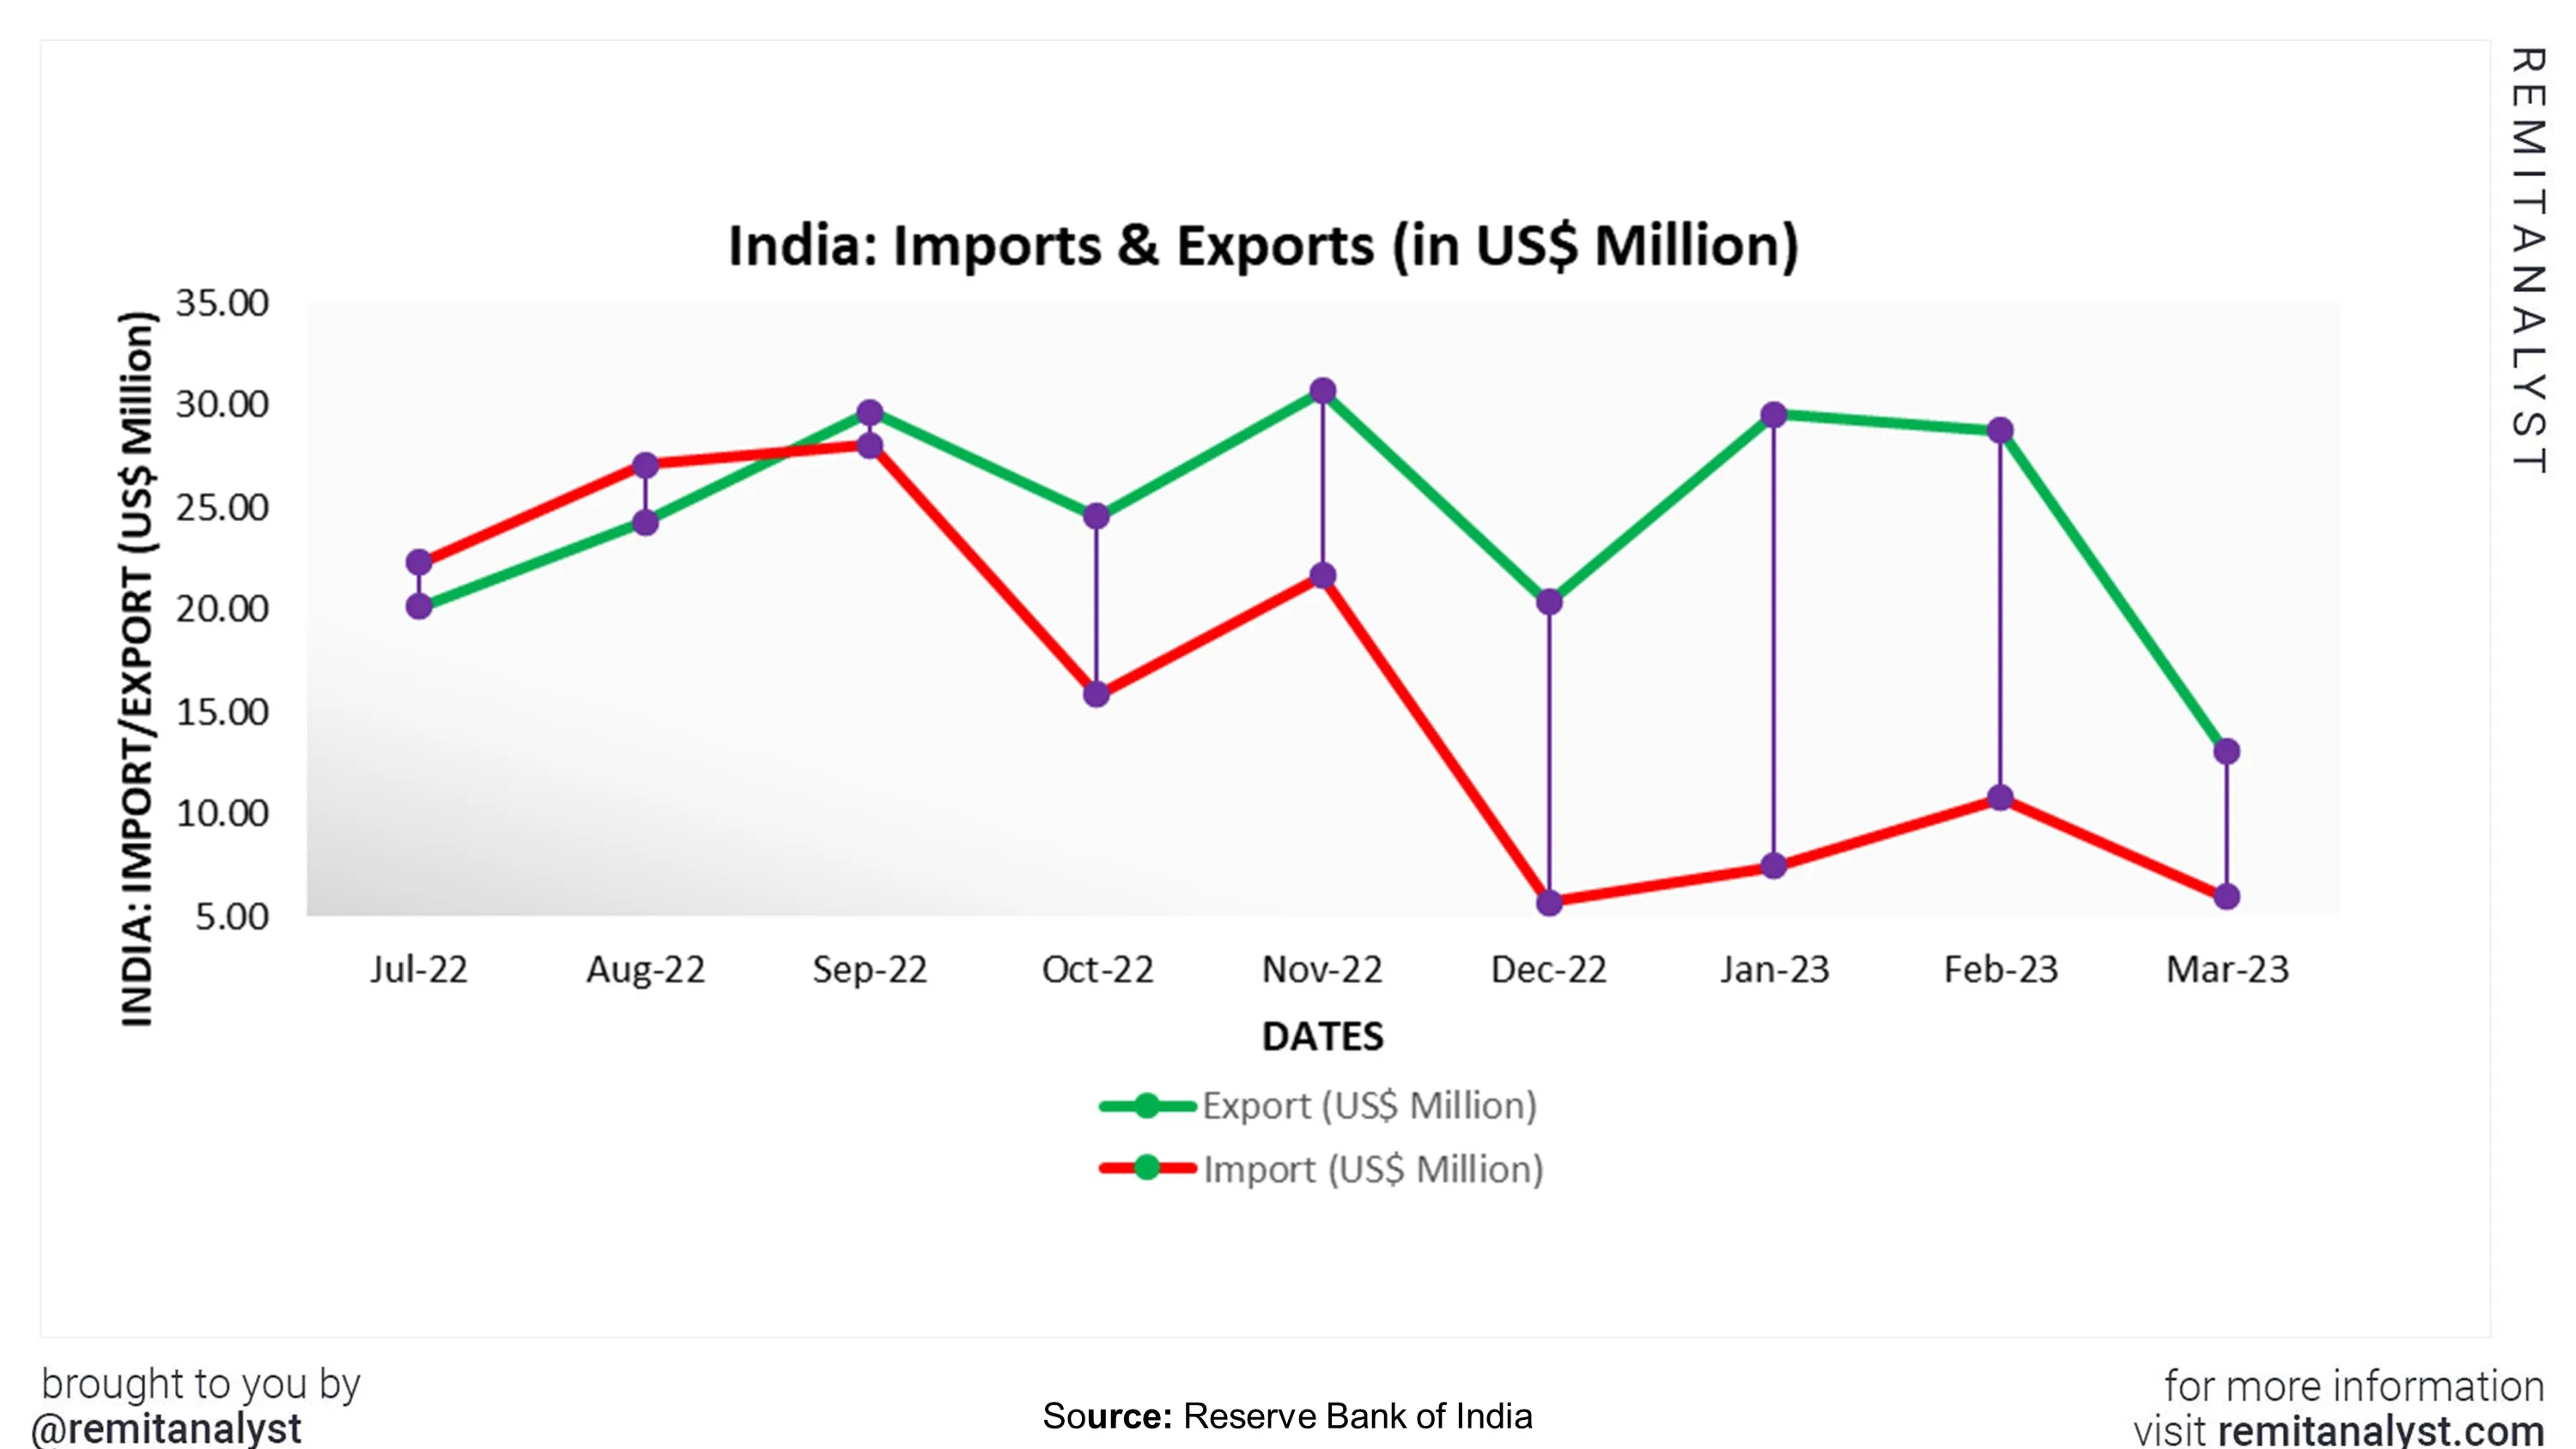 india-import-export-from-jul-2022-to-mar-2023